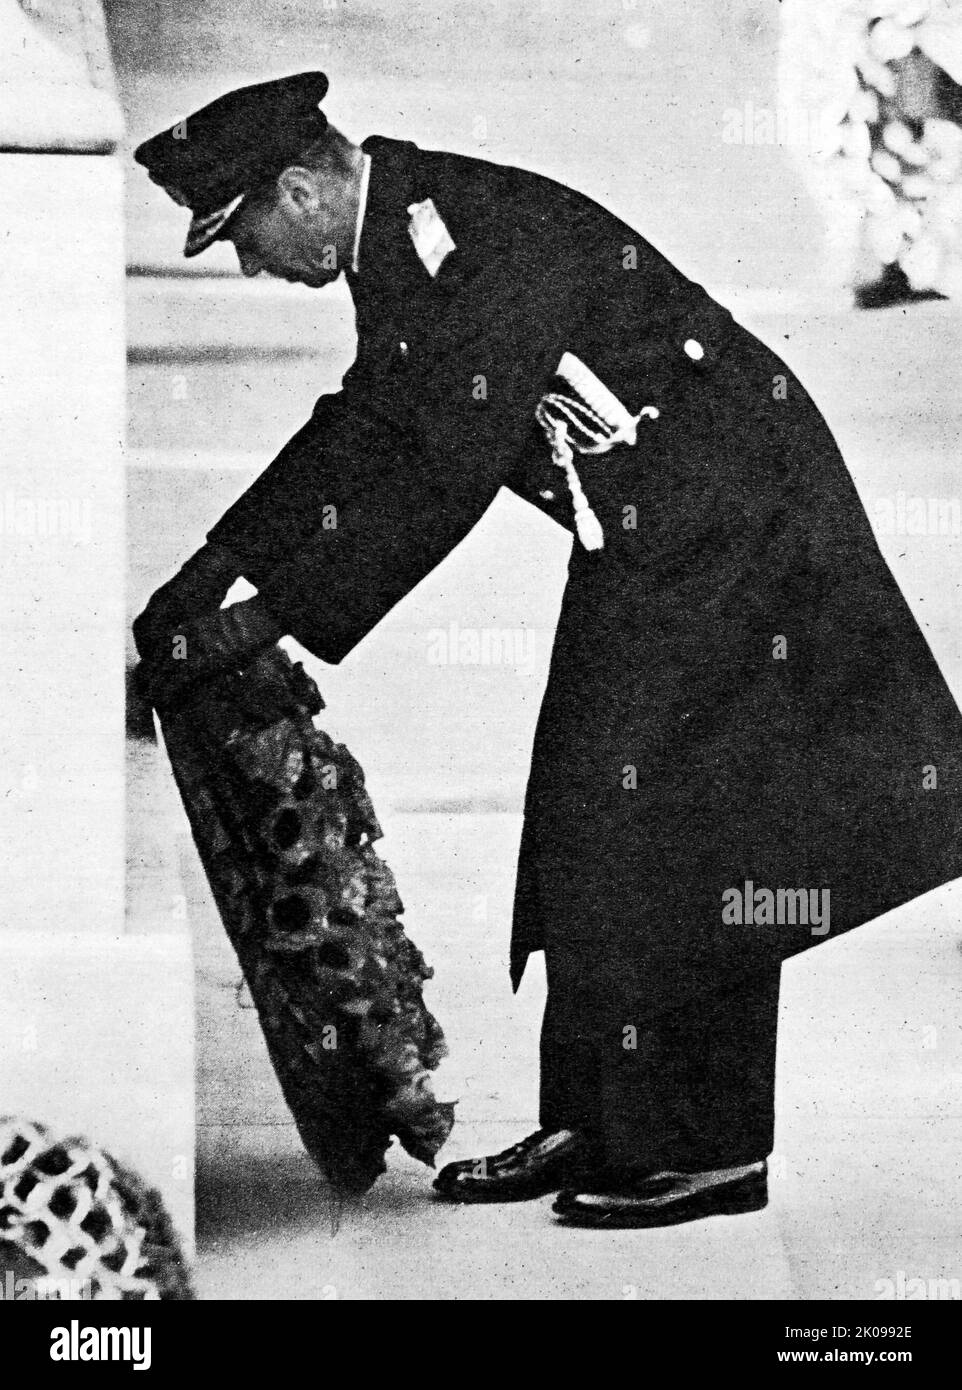 HM The King laying a wreath at The Cenotaph. George VI (Albert Frederick Arthur George; 14 December 1895 - 6 February 1952) was King of the United Kingdom and the Dominions of the British Commonwealth from 11 December 1936 until his death in 1952. He was concurrently the last Emperor of India until August 1947, when the British Raj was dissolved. Stock Photo